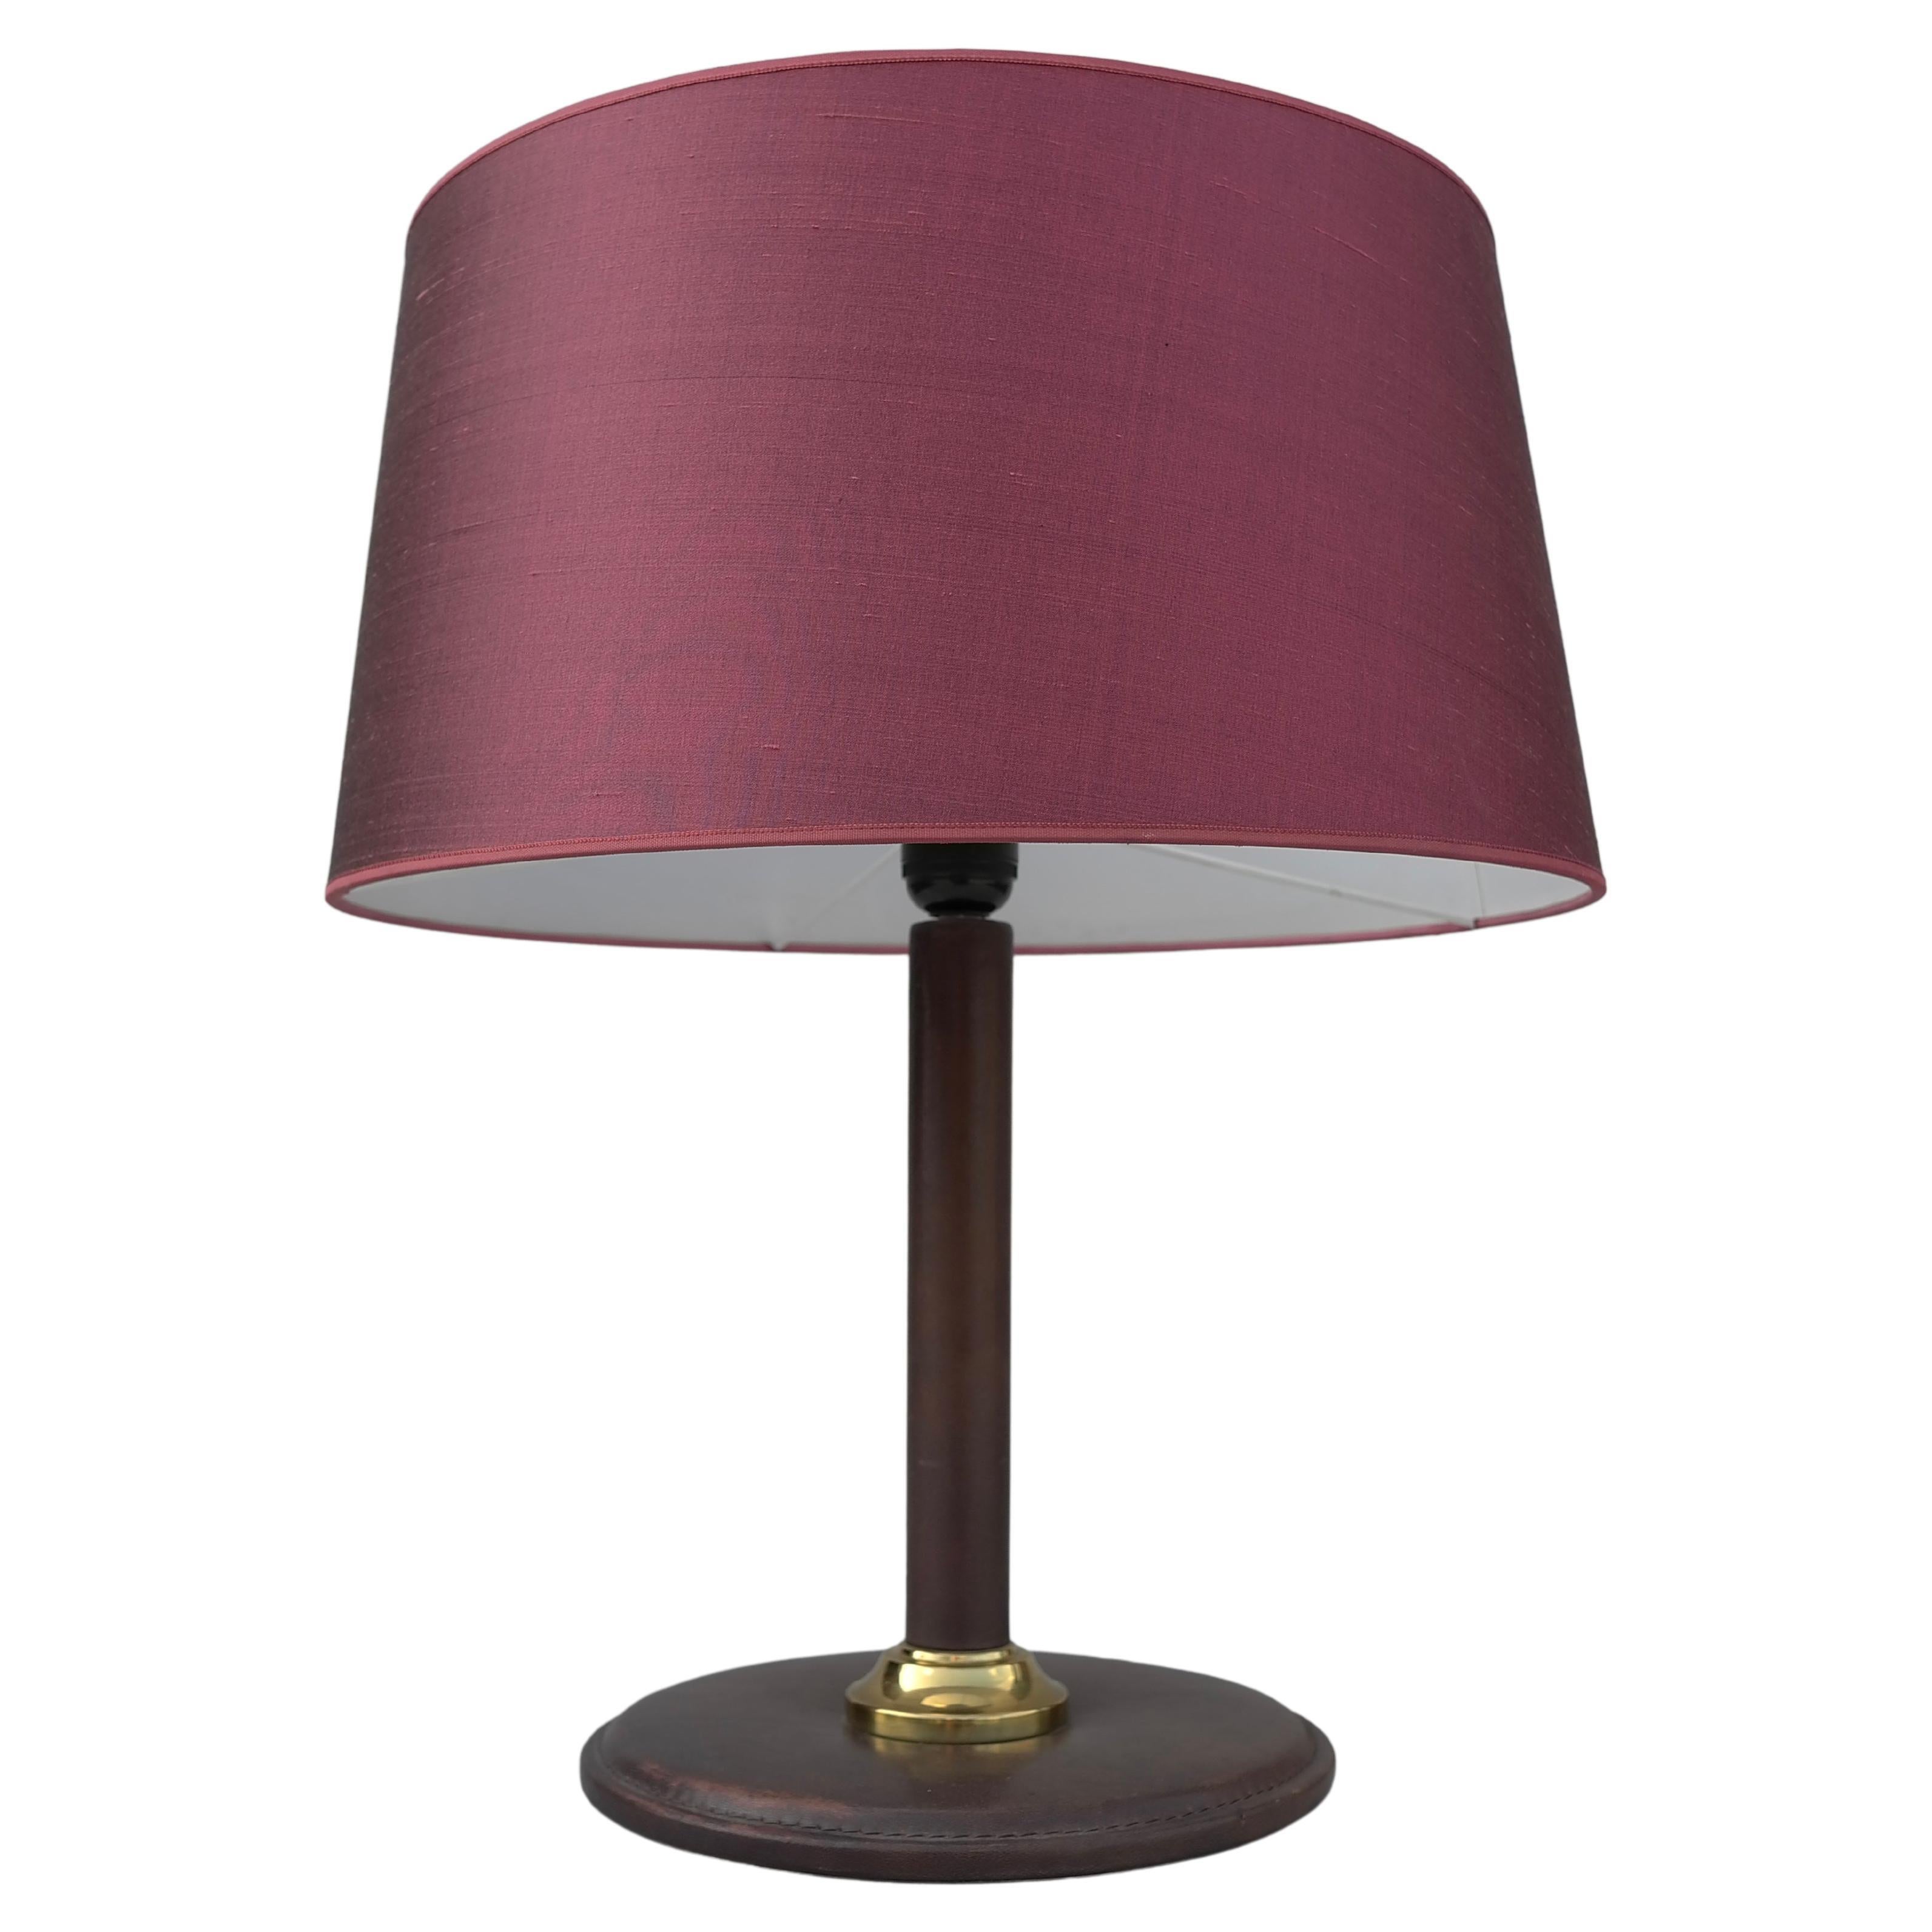 Hand-Stitched Brown Leather Table Lamp with Silk Deep Pink Shade, France, 1960s